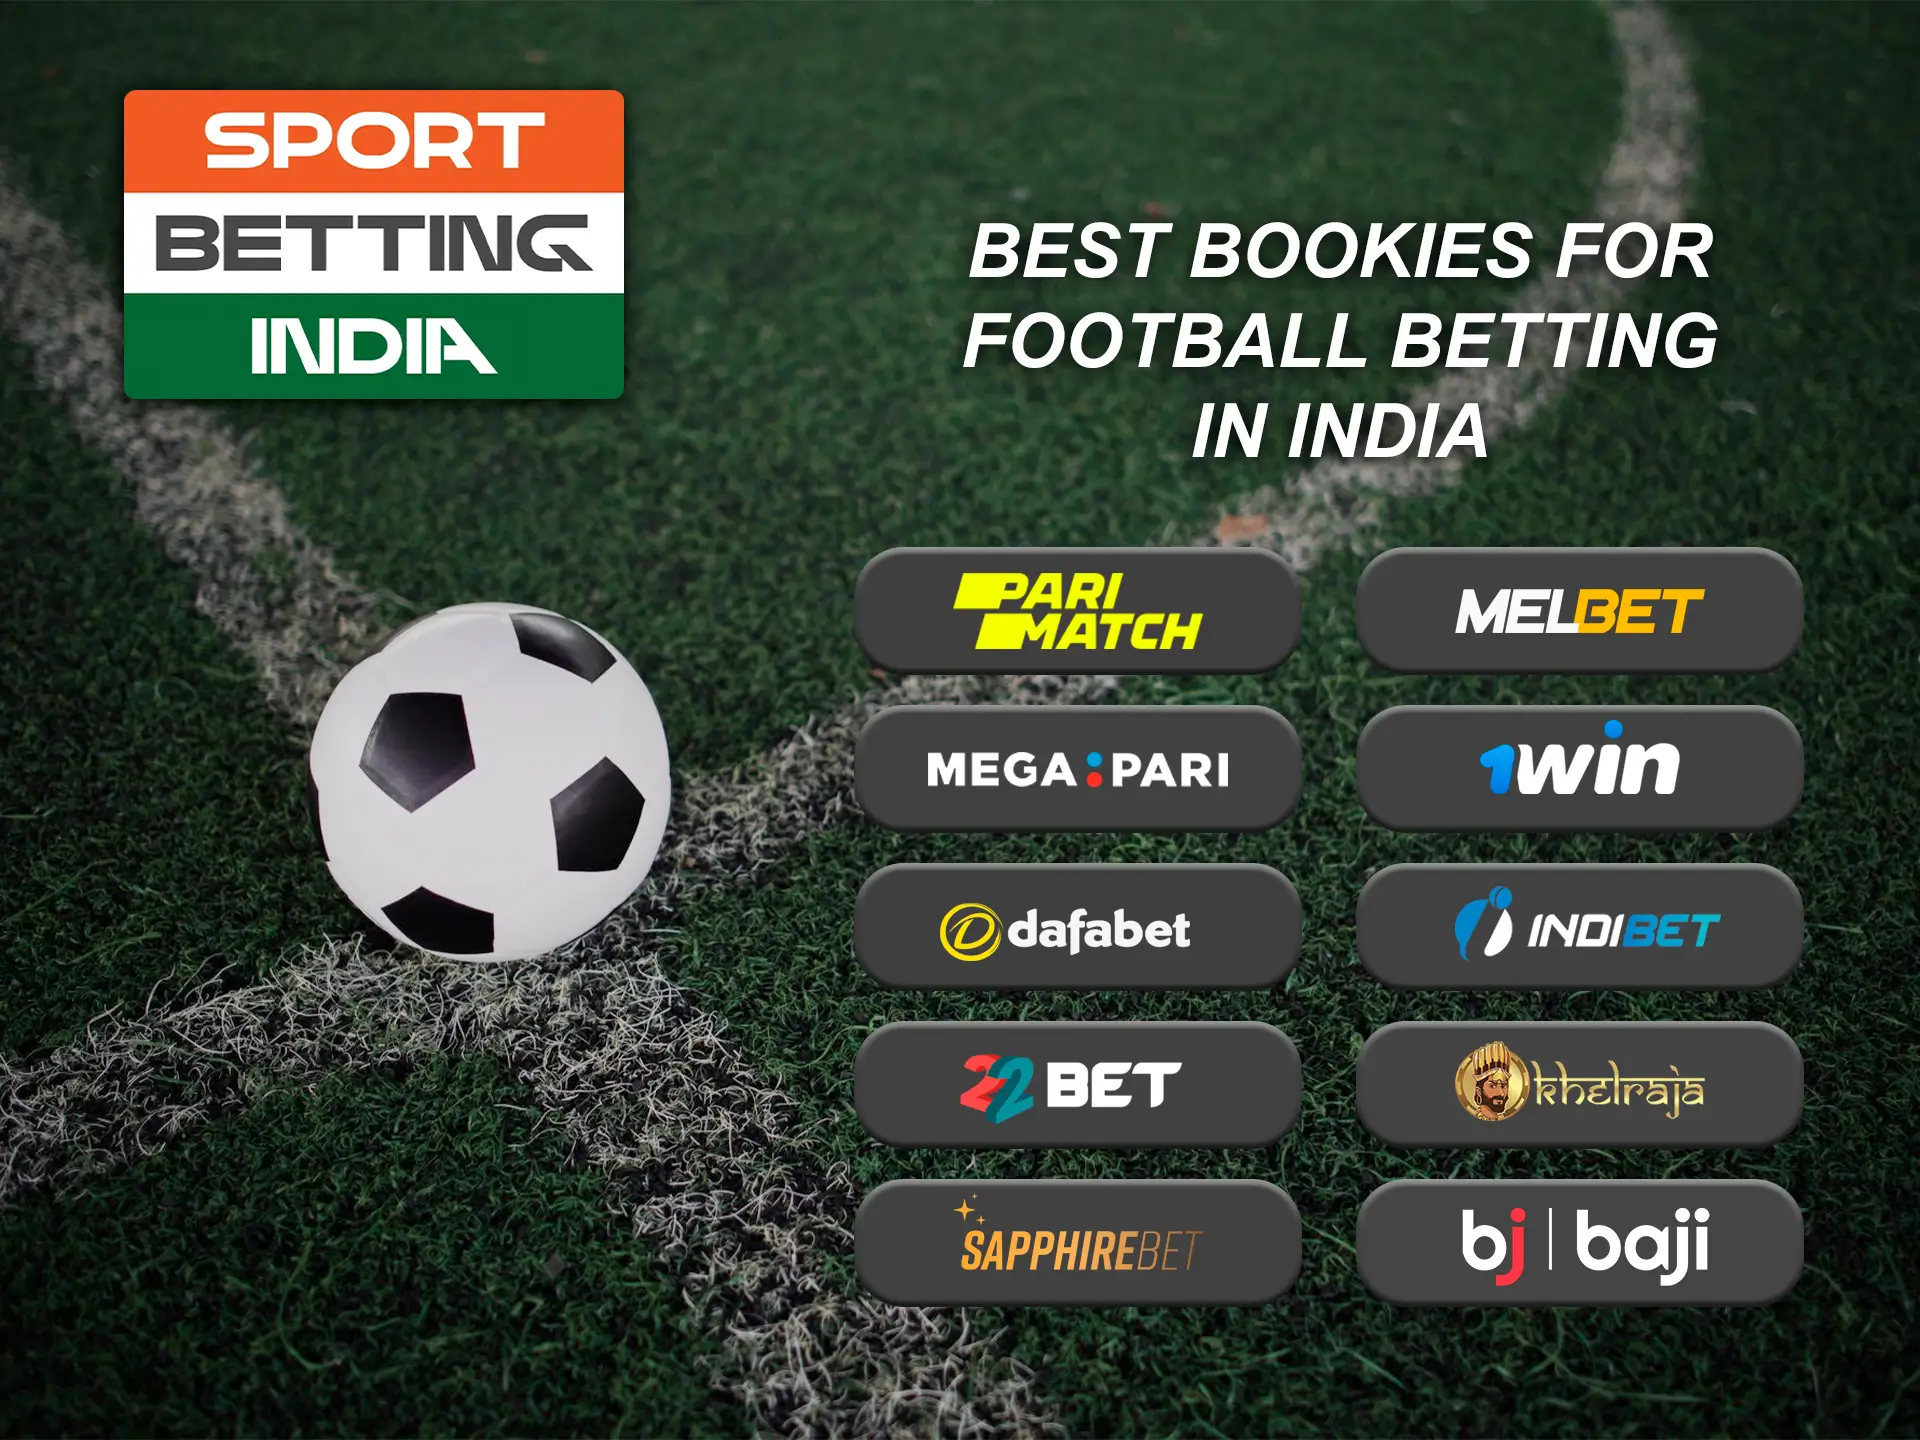 Use trusted and licensed bookmakers in India for football betting.